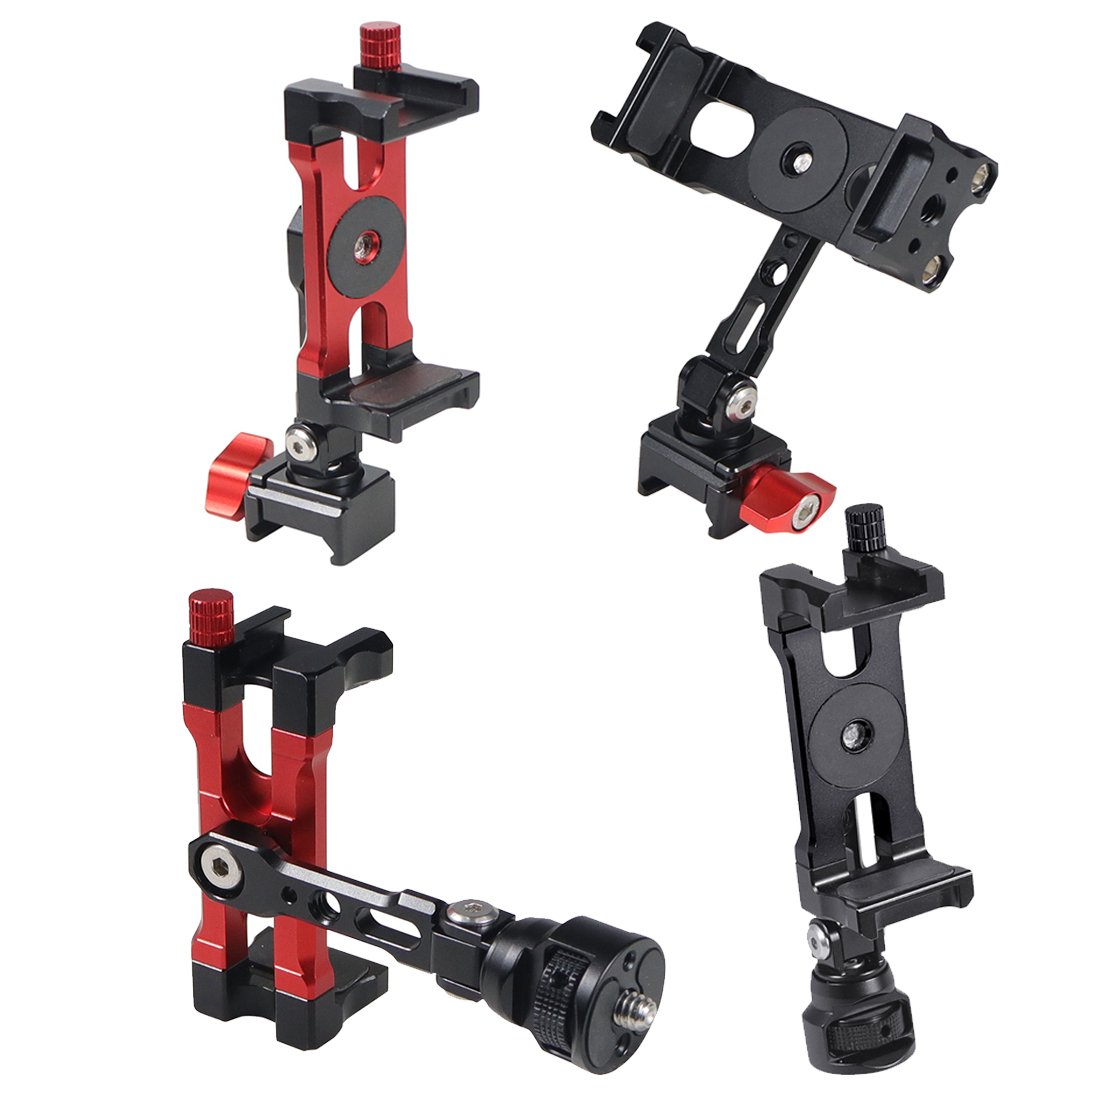 Metal Phone Holder NATO Rail Clamp ARCA / 1/4" Screw with Cold Shoe Mount for Smartphone Camera Gimbal Stabilizer Tripod Bracket